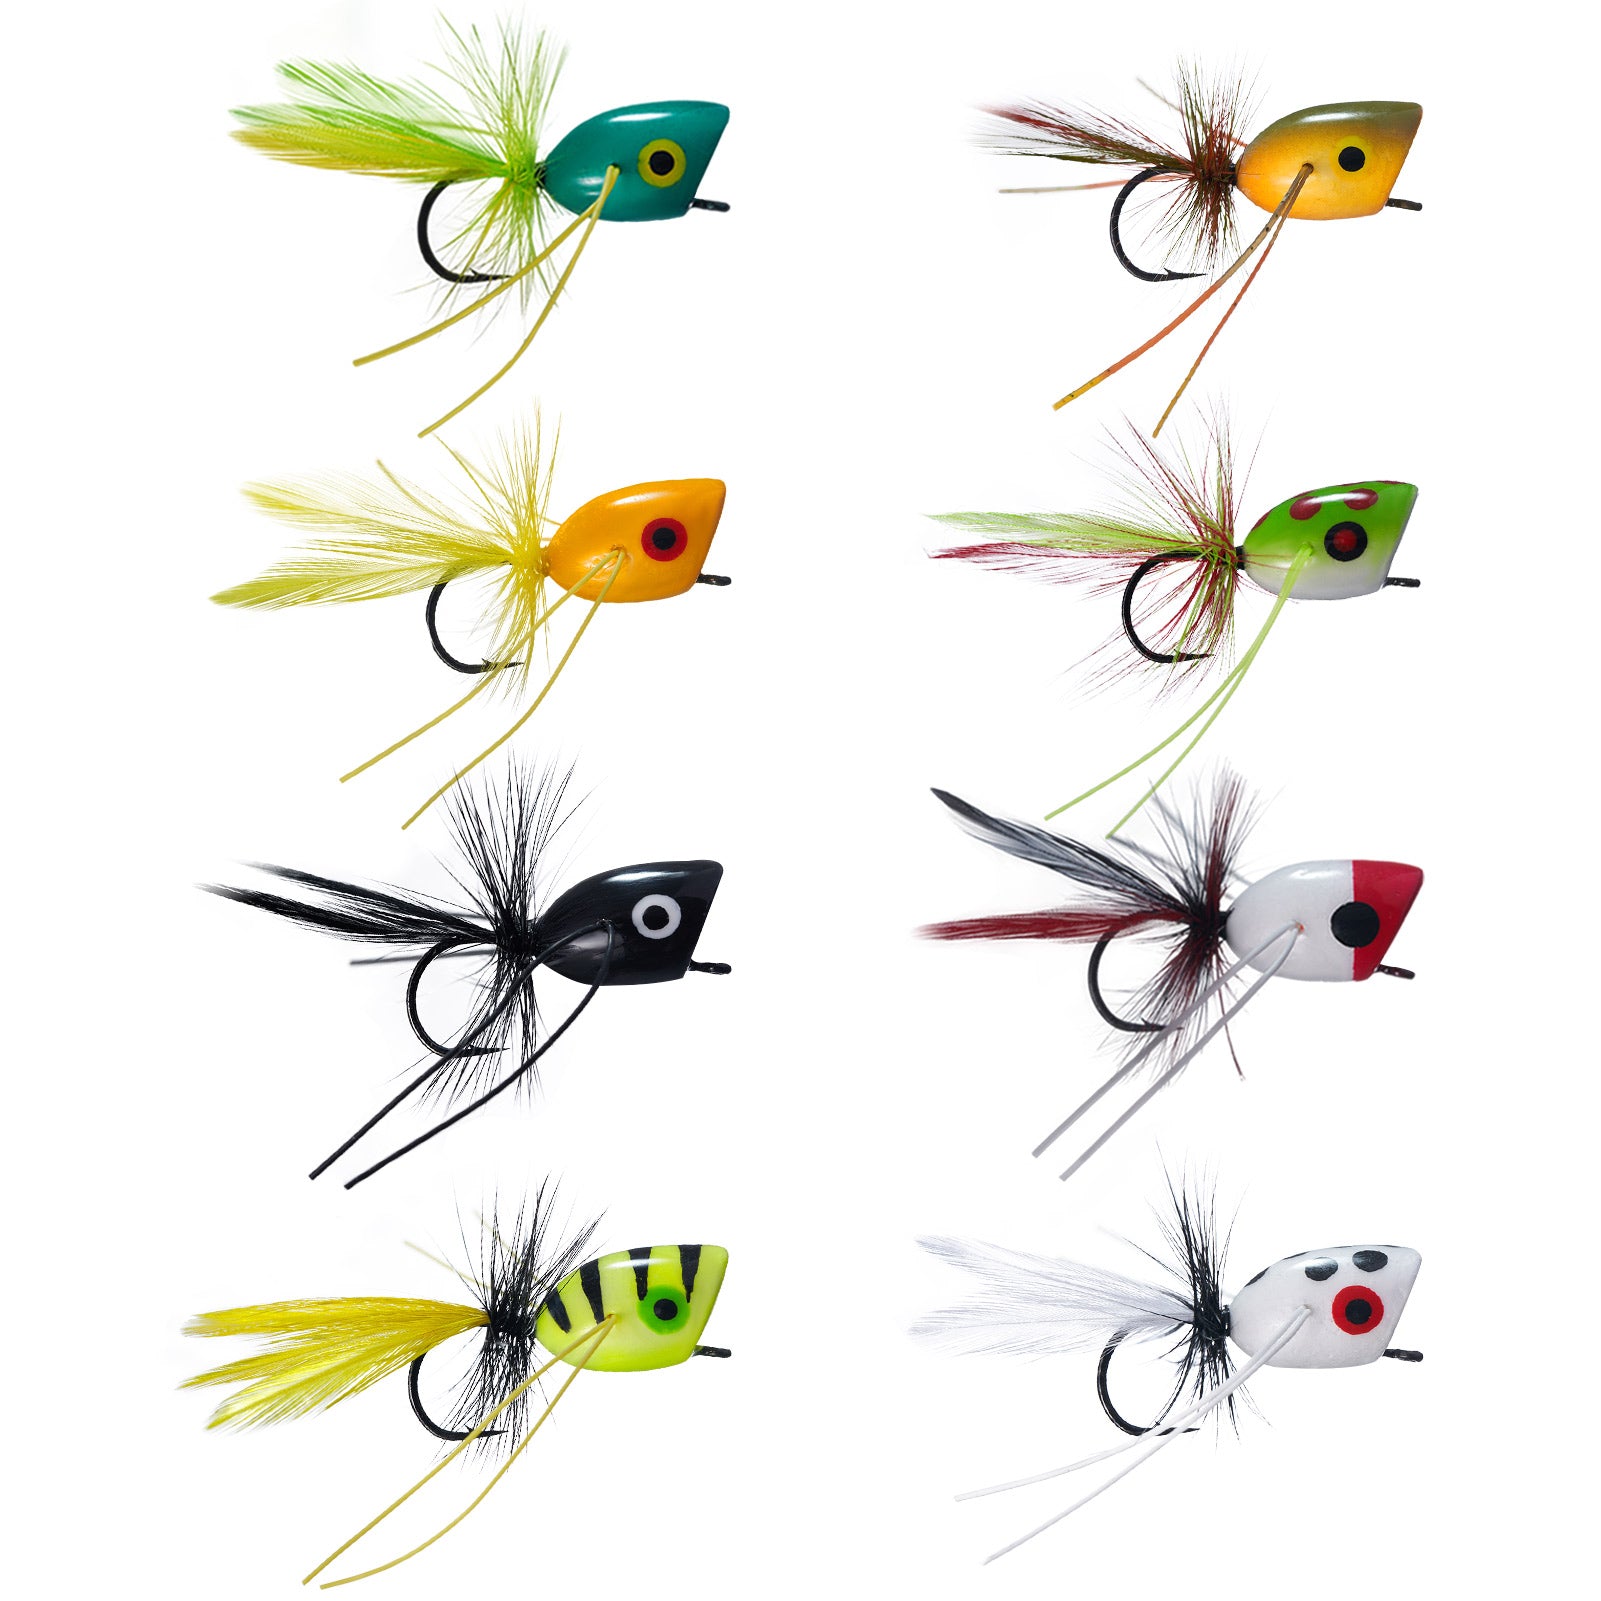 ZOROOM 10PCS Fly Fishing Poppers,Topwater Fishing Lures Bass